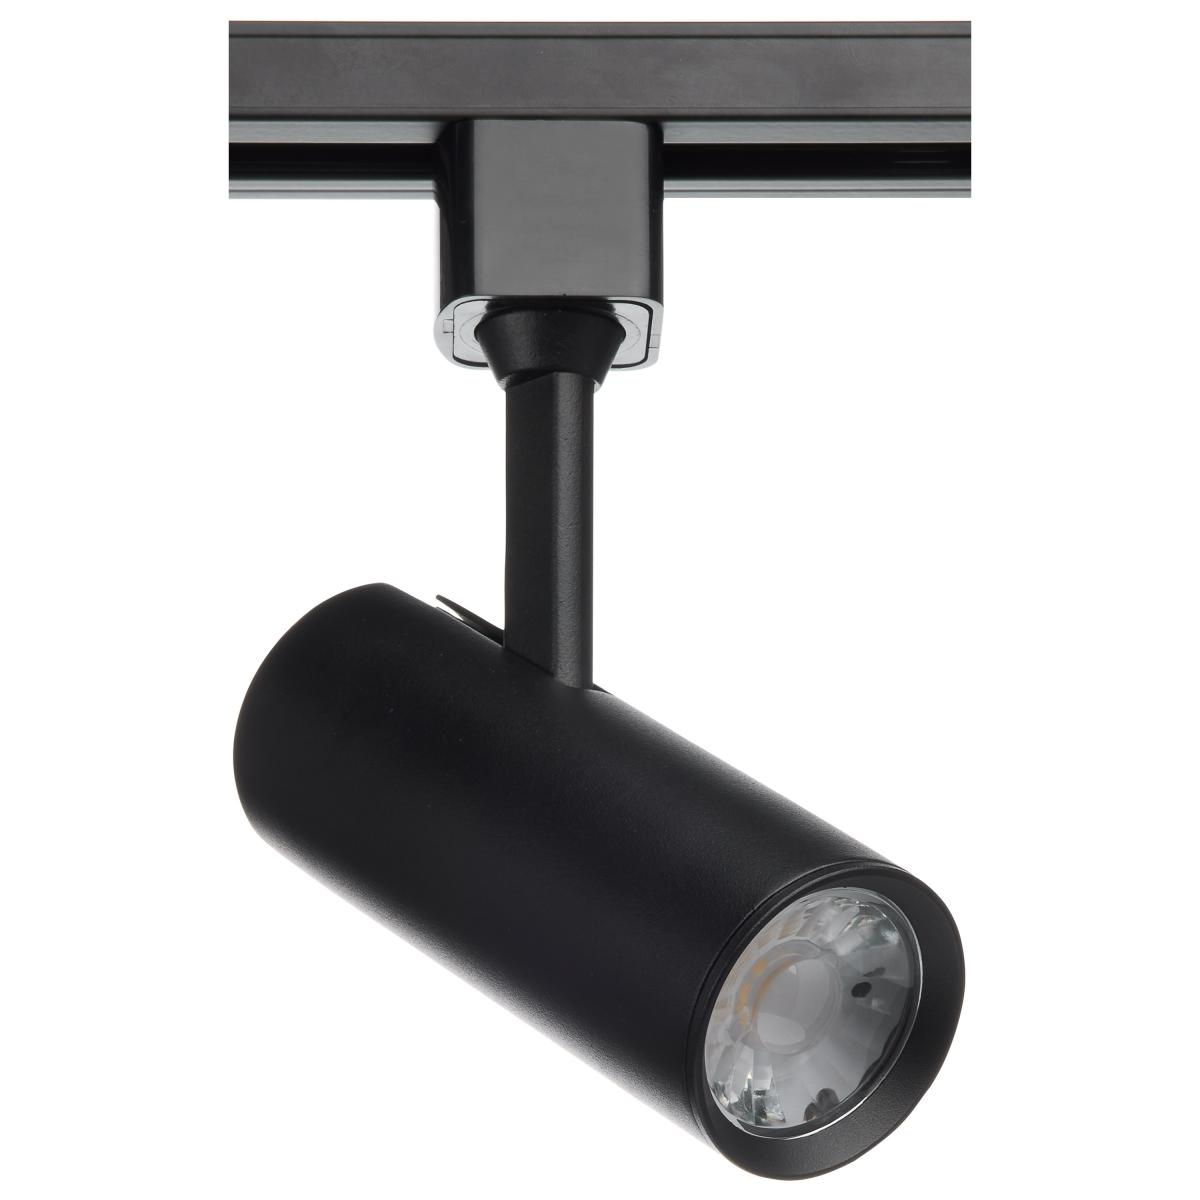 Commercial Style LED Track Head Only  - Black Finish - 24 Degree Beam - 600 Lumens - 3000K Soft White - 10 Watt - Dimmable - 3 Contact Halo Style